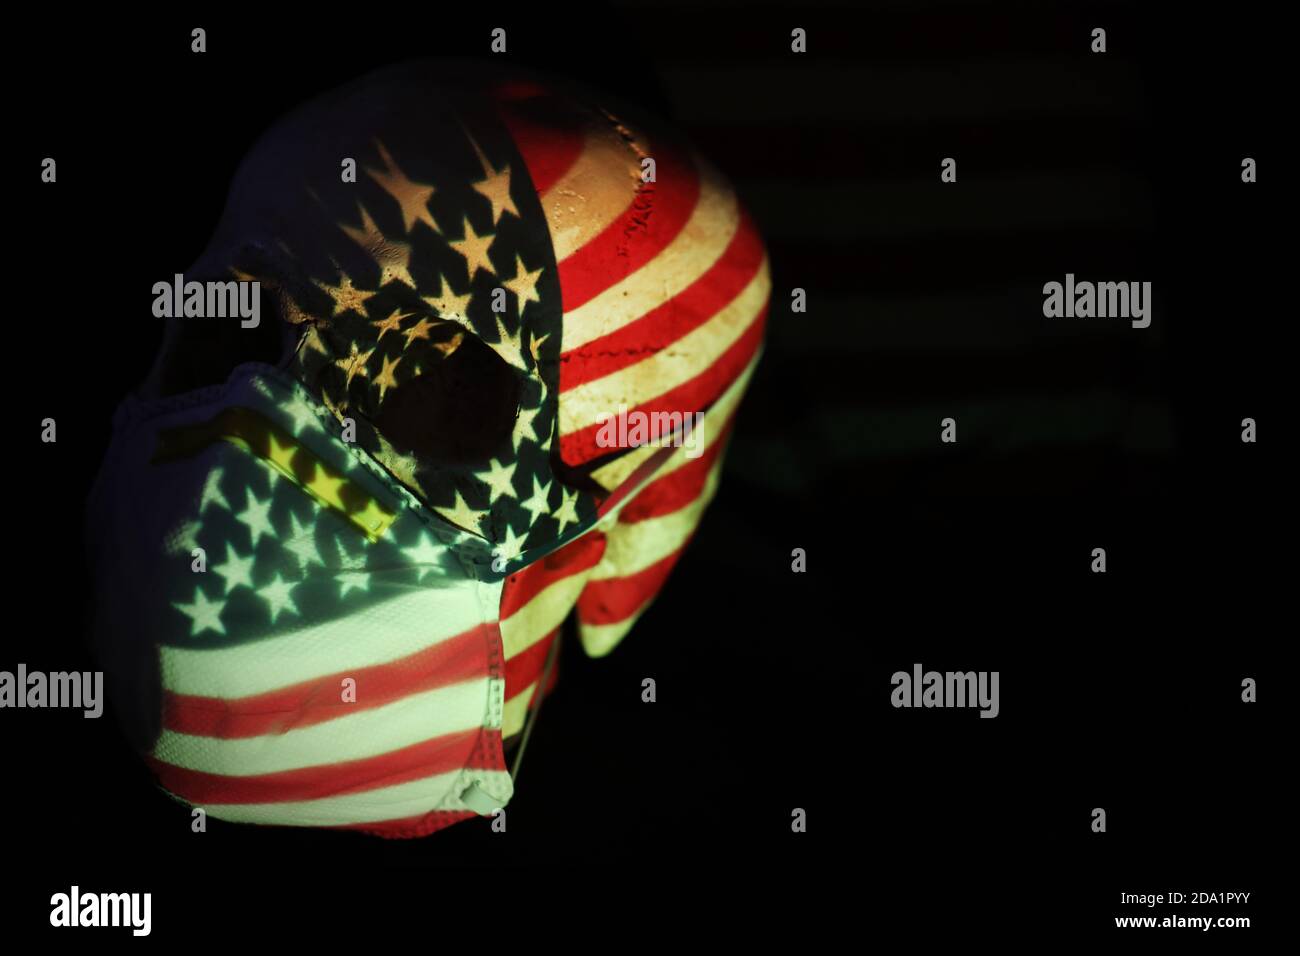 The American stars and stripes flag projected over a skull wearing a breathing face mask. Corona virus covid 19 global pandemic social distancing meas Stock Photo